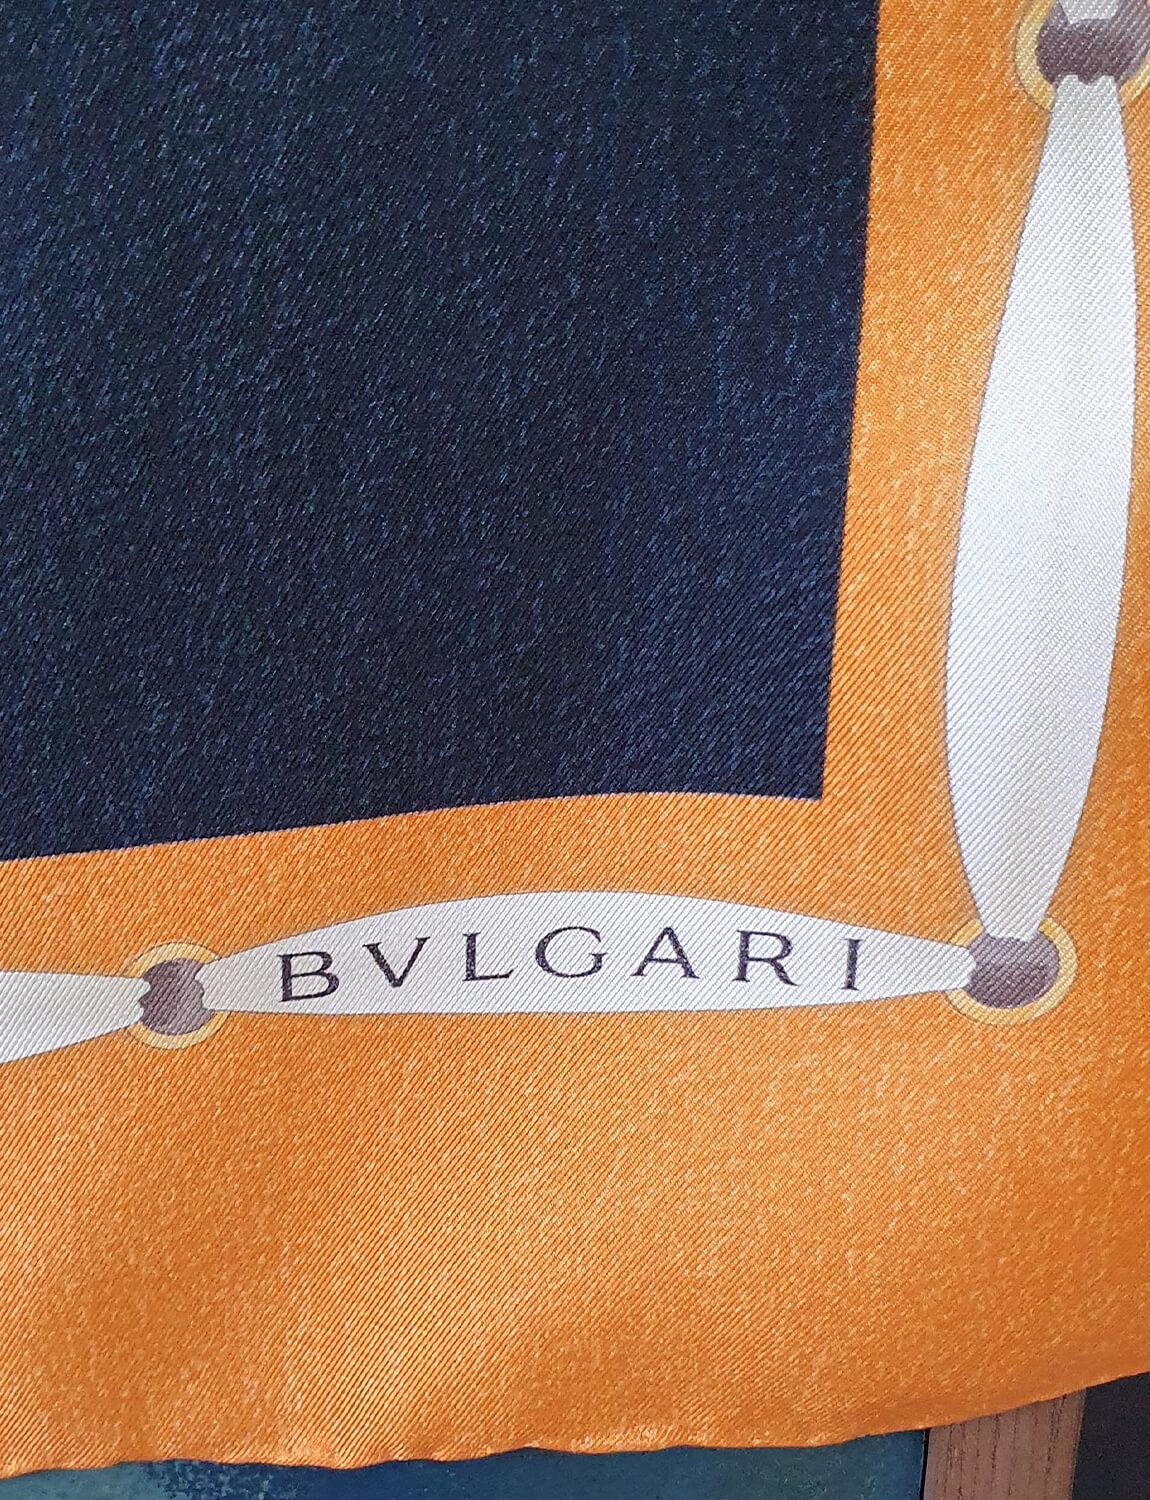 A beautifully designed vintage Bvlgari scarf with an orange border and navy centre silk centre. With lanterns, vases, handbags and objets as motifs in a variety of colours.  The foulard/scarf is signed by Davide Pizzigom and has the original Bvlgari